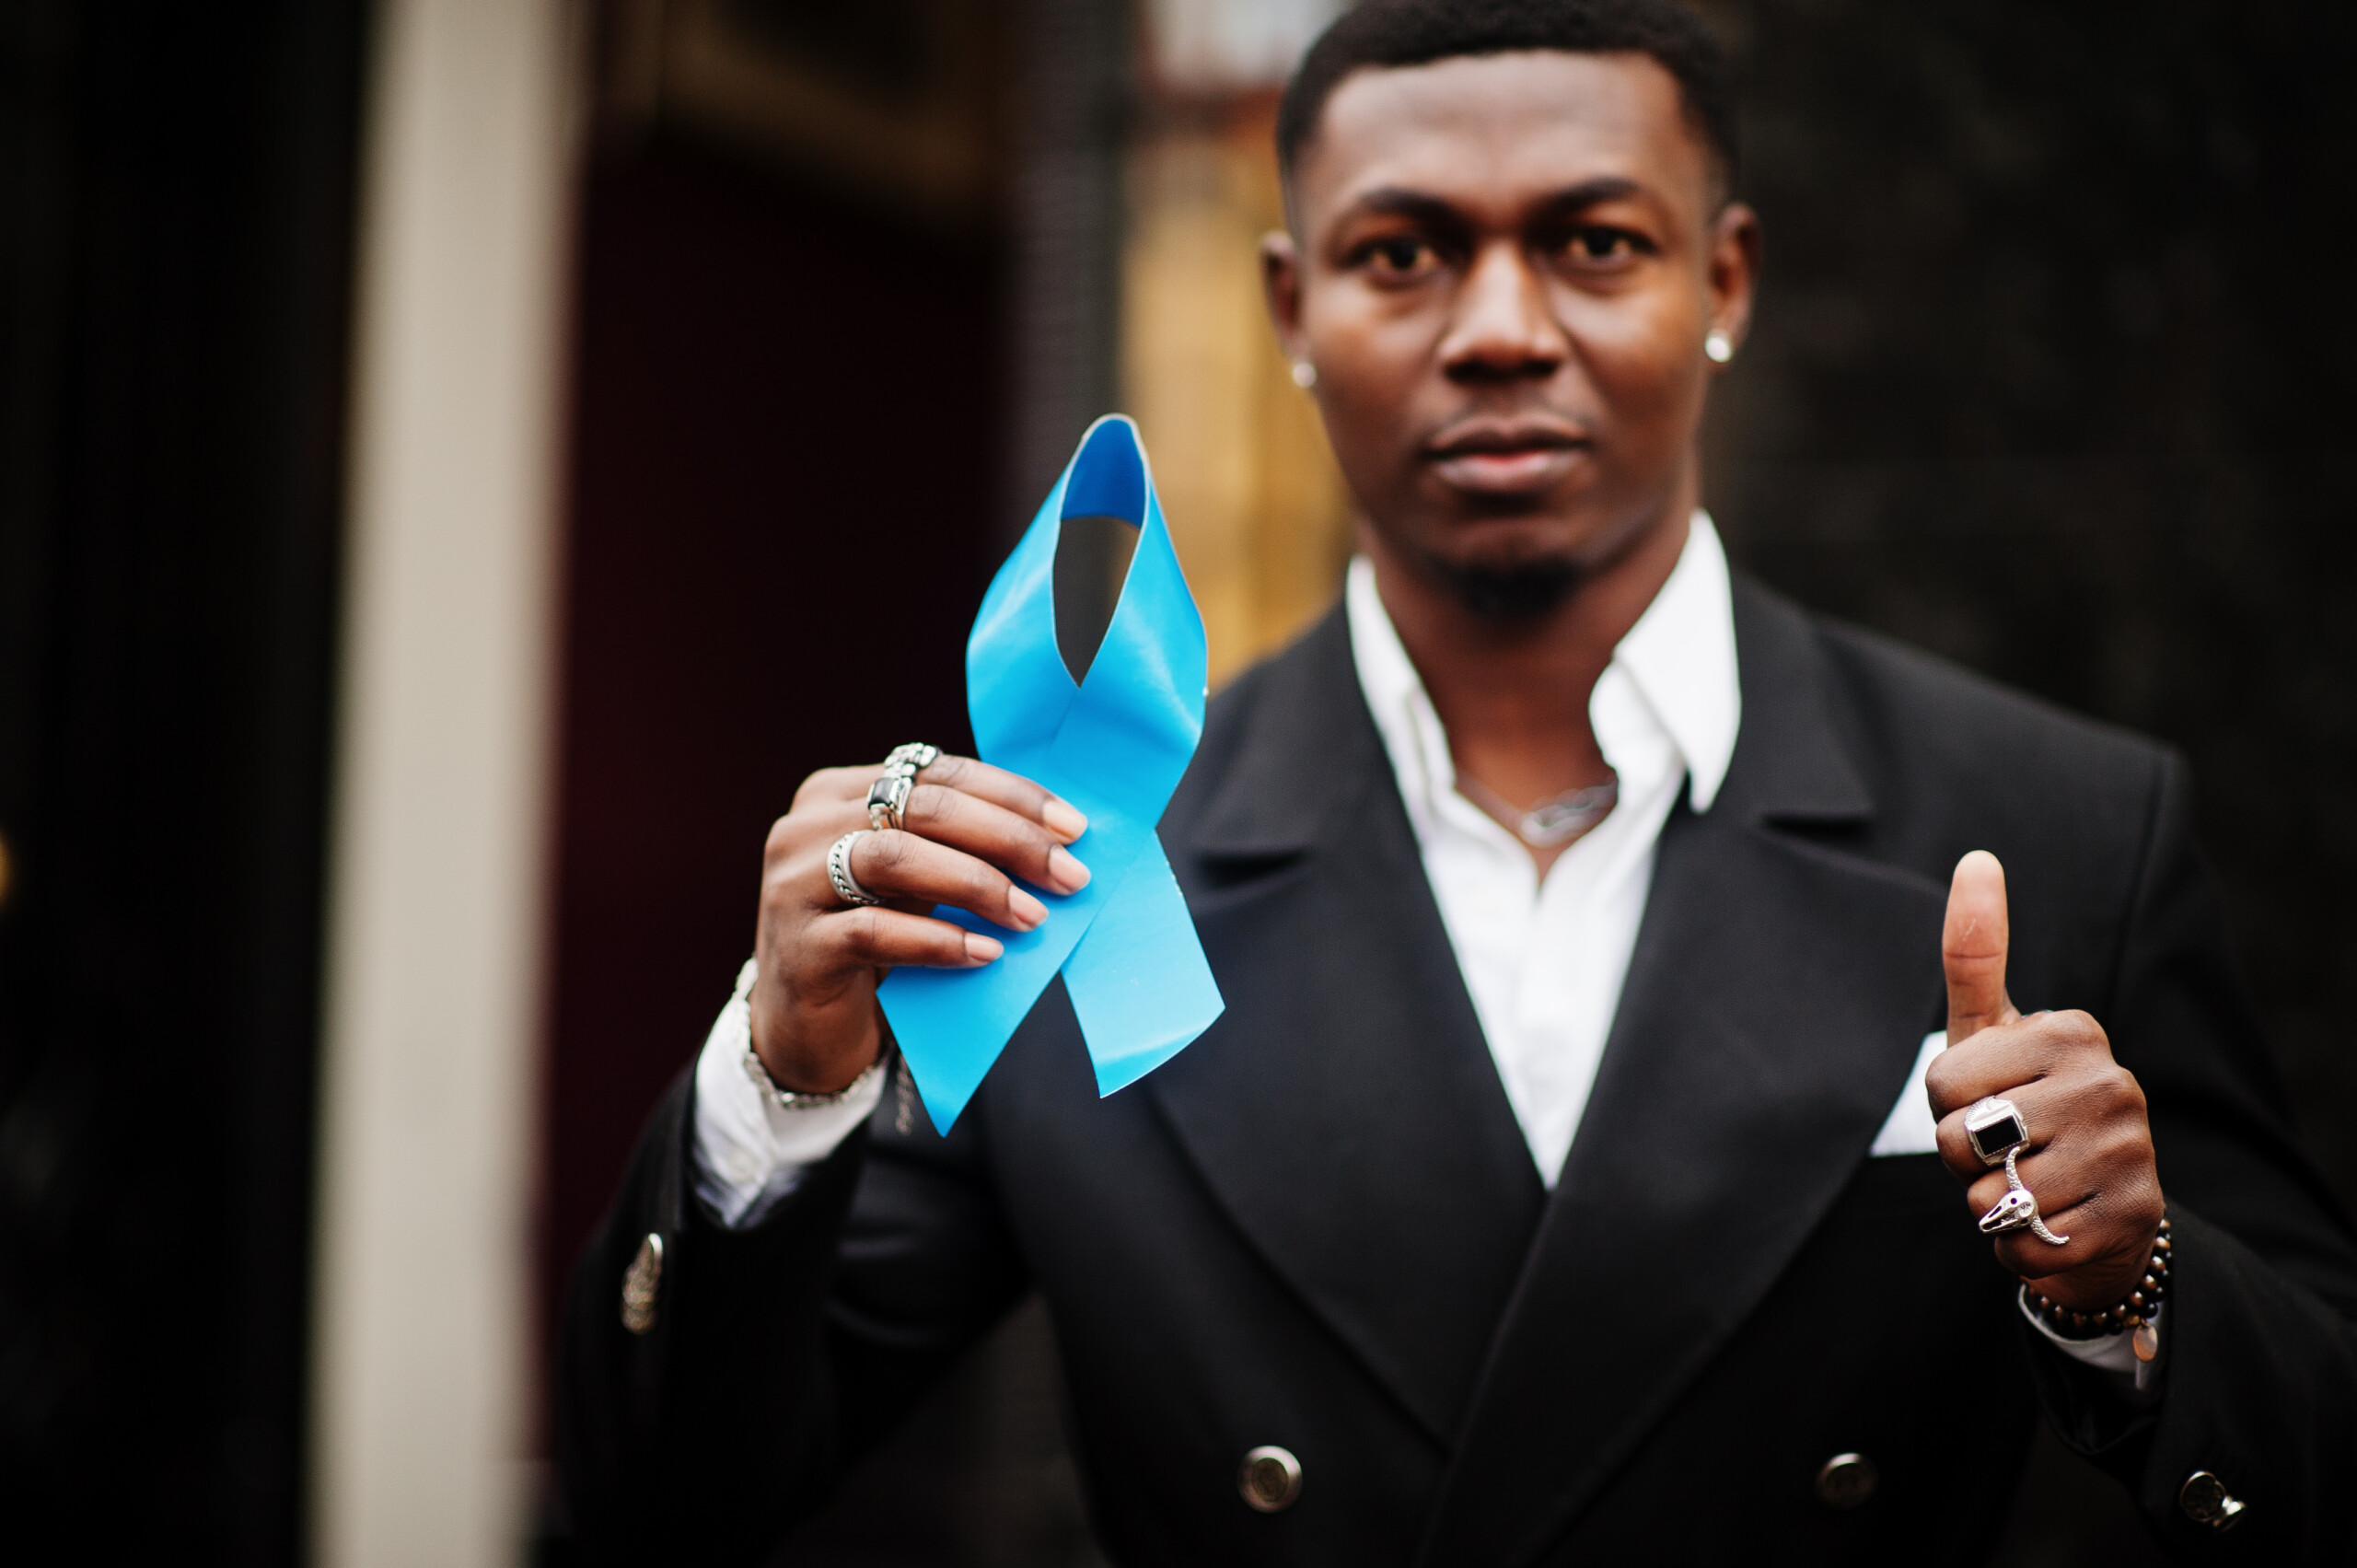 Why Are African American Men More Likely to Get Prostate Cancer?